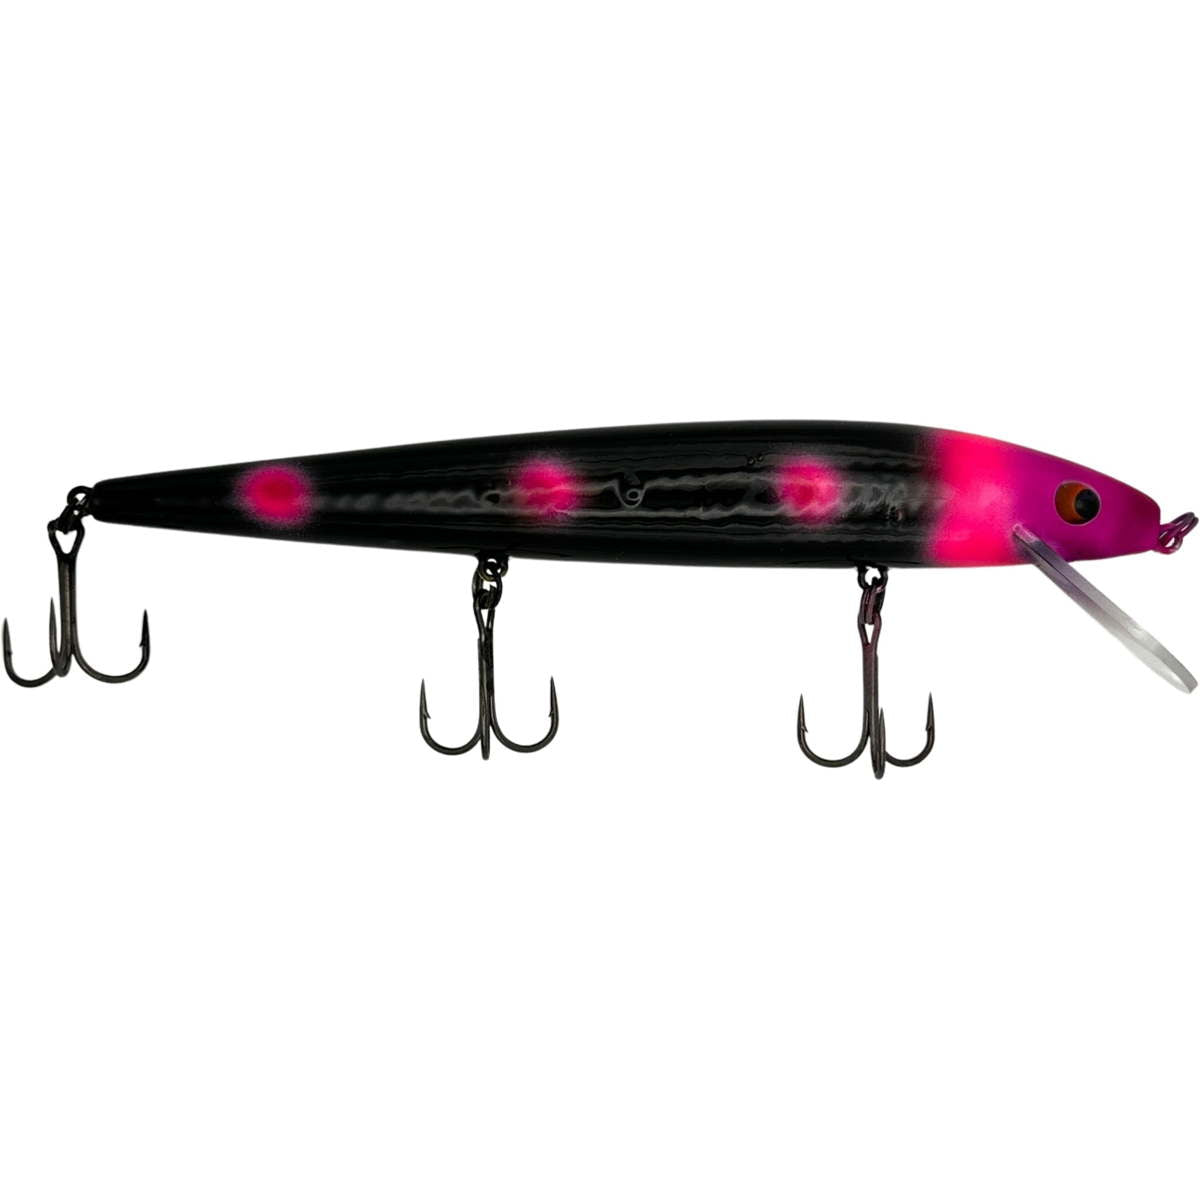 Photo of JT Custom Tackle Handpainted Smithwick Perfect 10 Rogue for sale at United Tackle Shops.